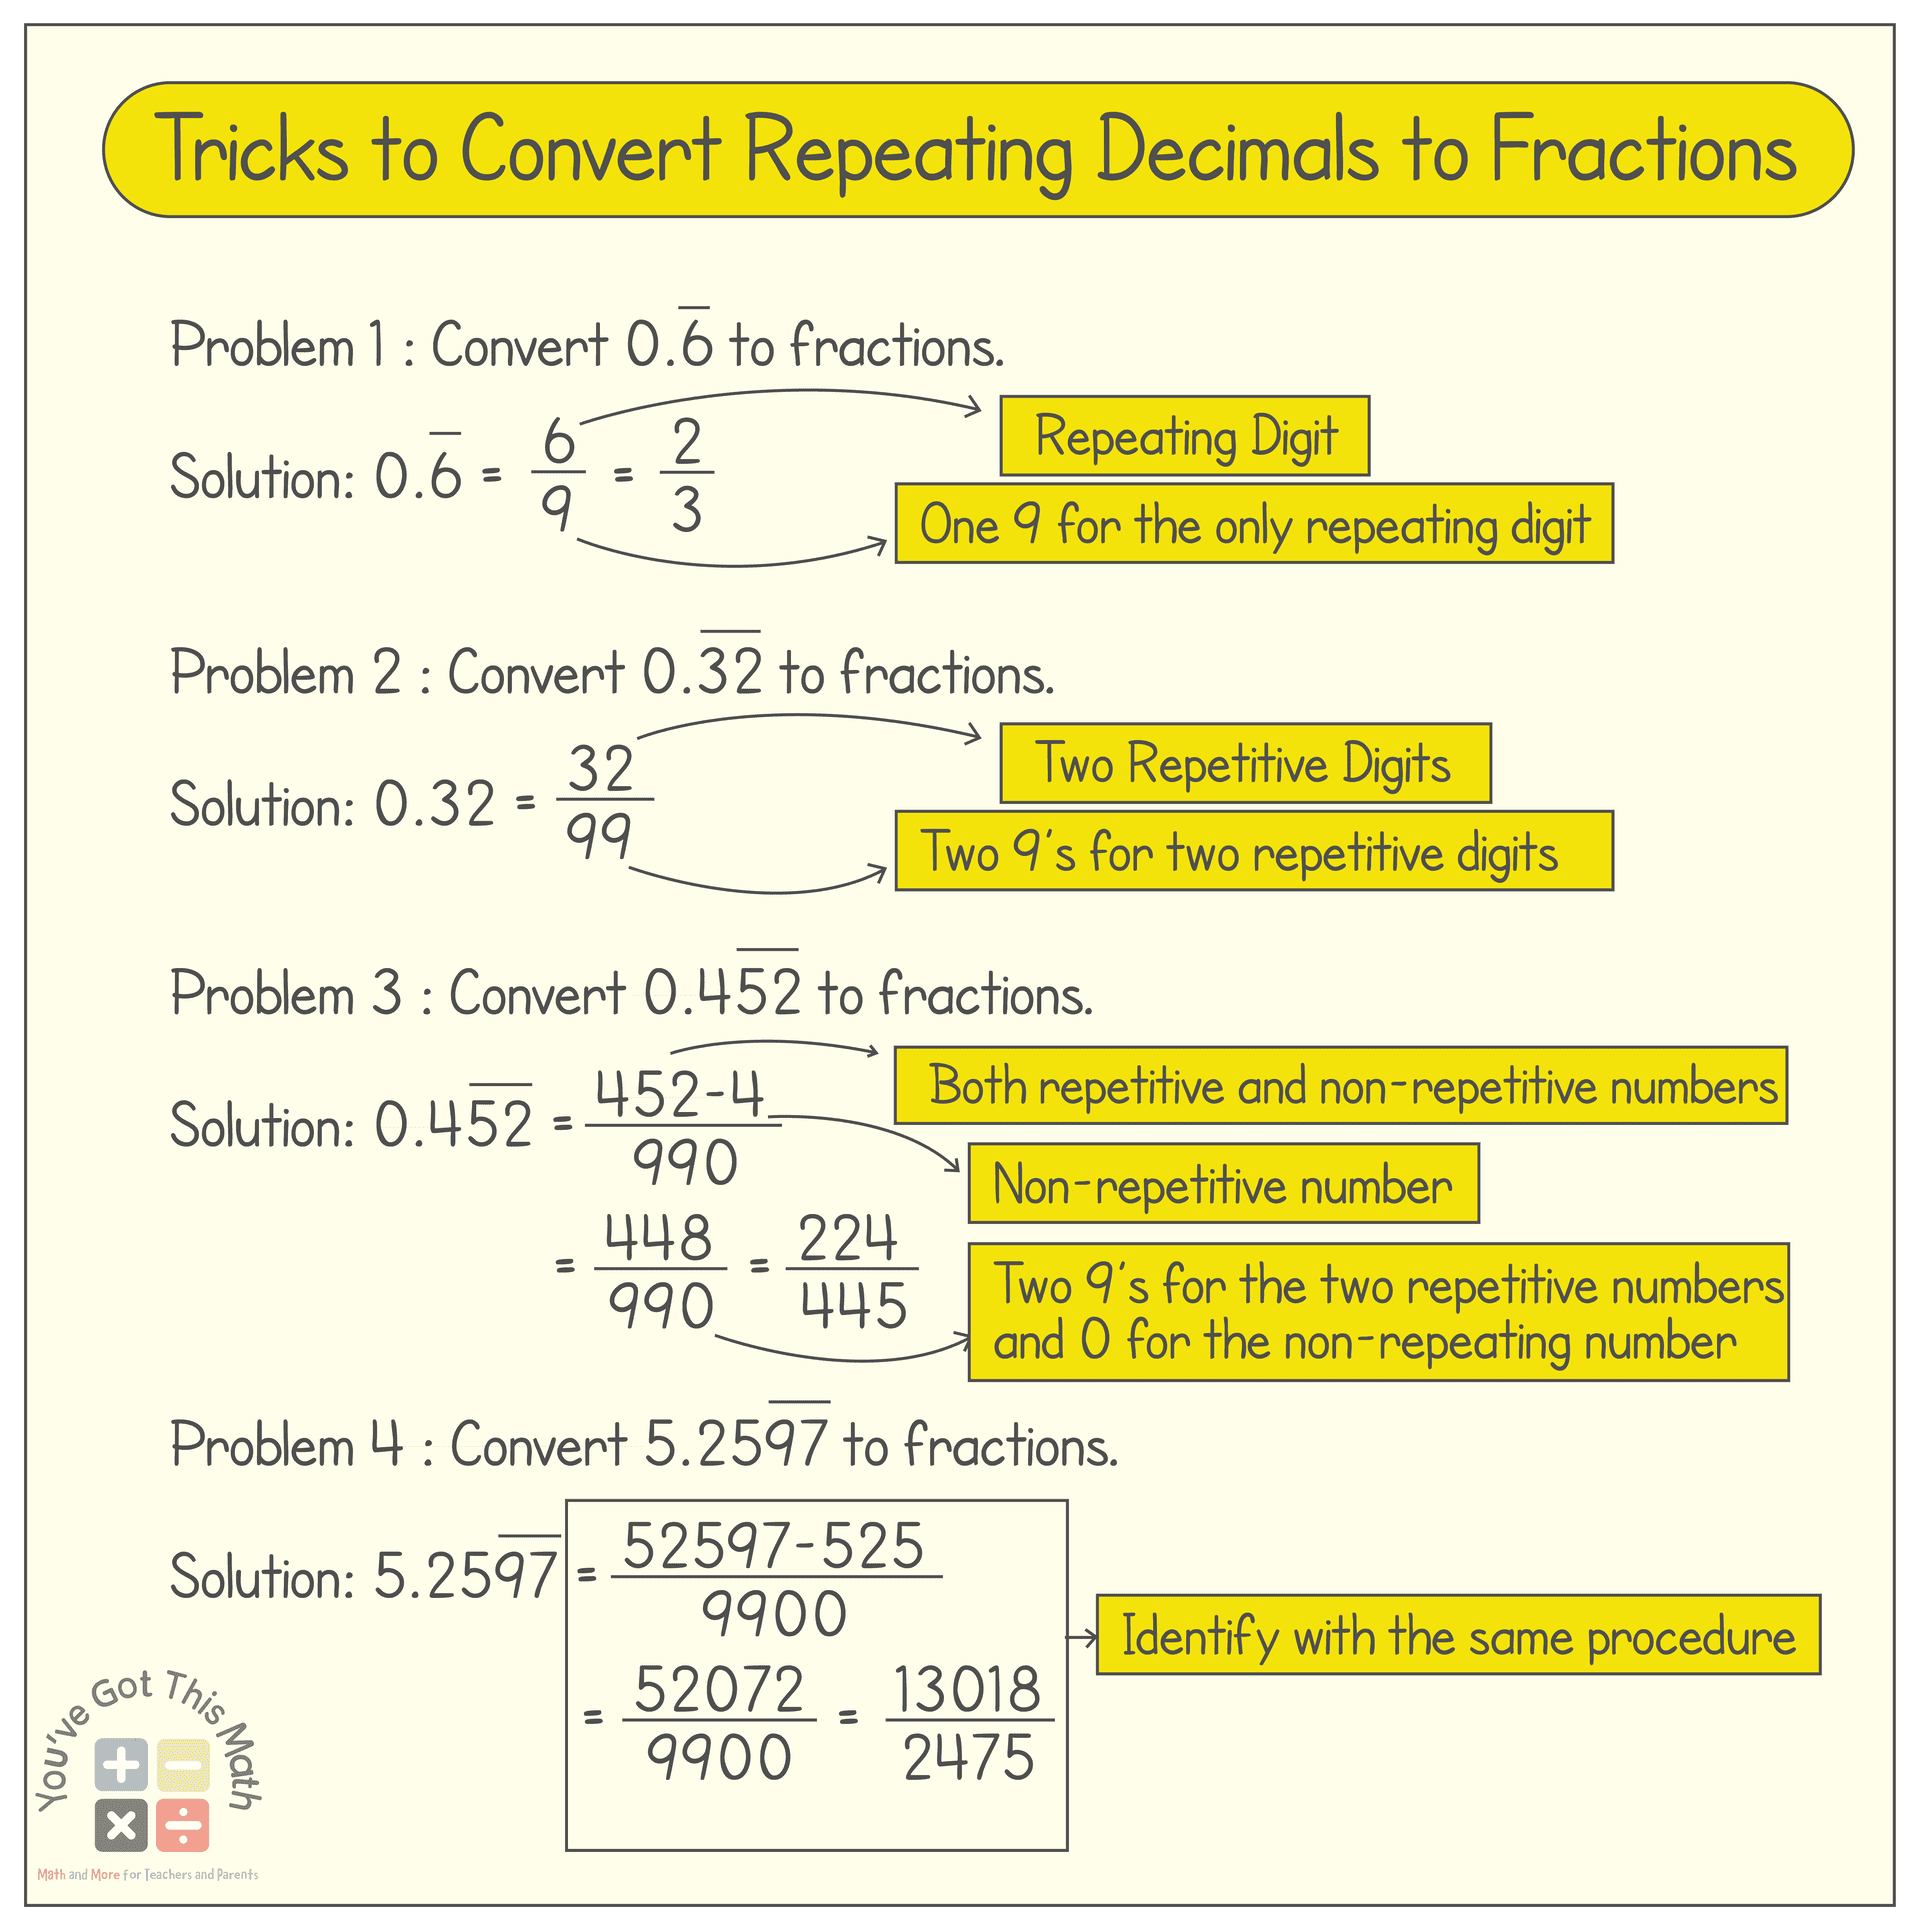 Converting Repeating Decimals to Fractions Worksheet | 15 Free Pages